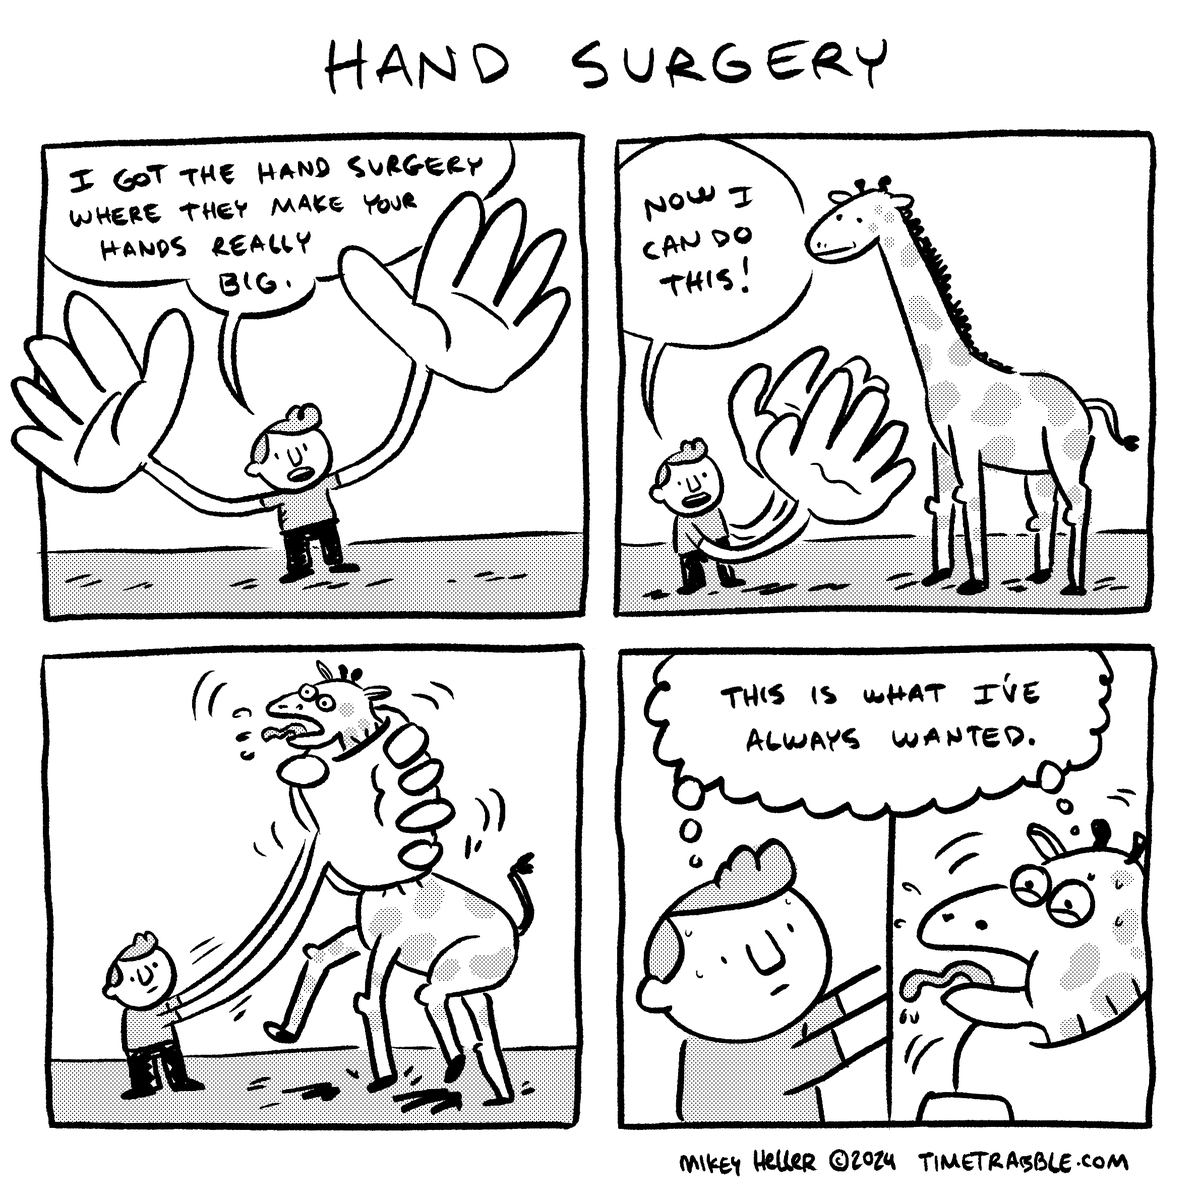 i drew a comic about hand surgery